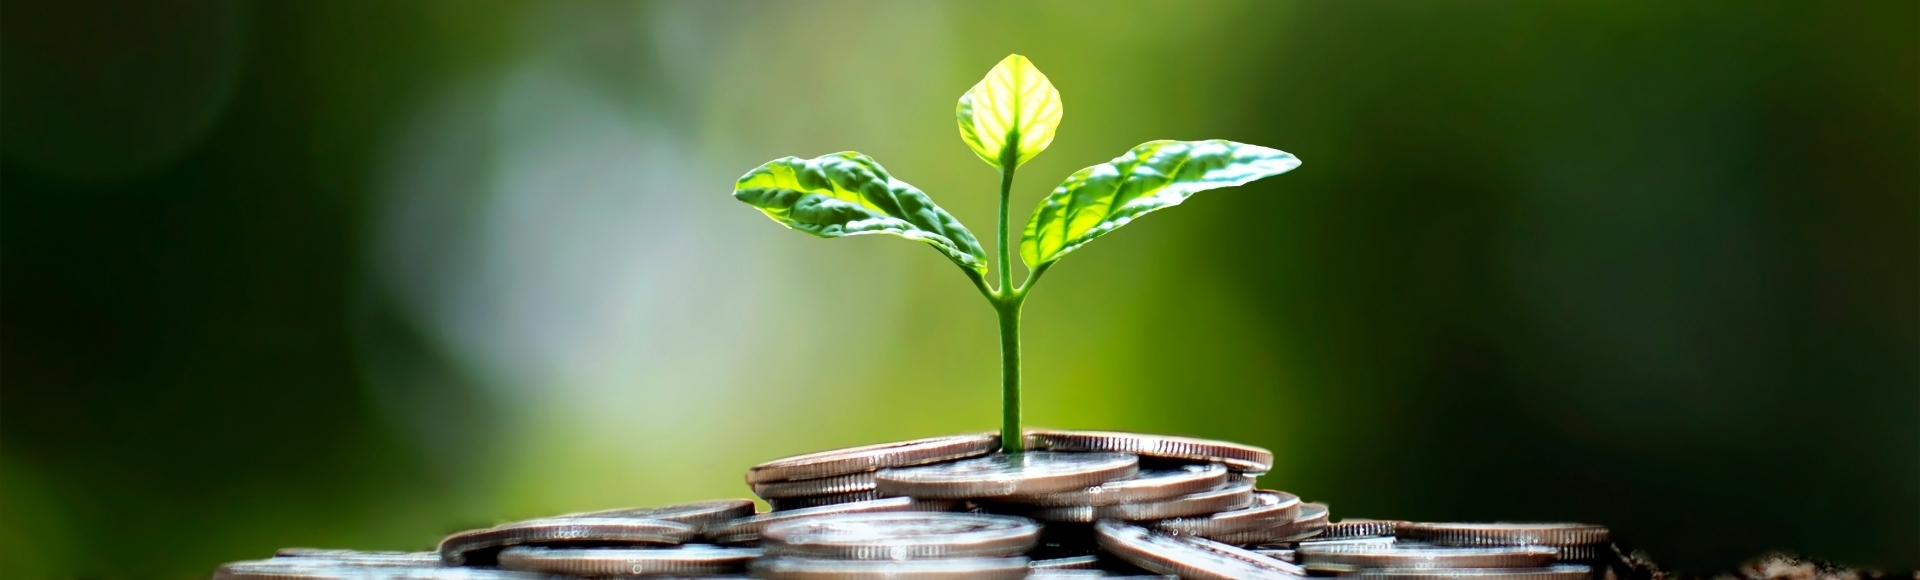 Why sustainable investing should be part of your investment strategy